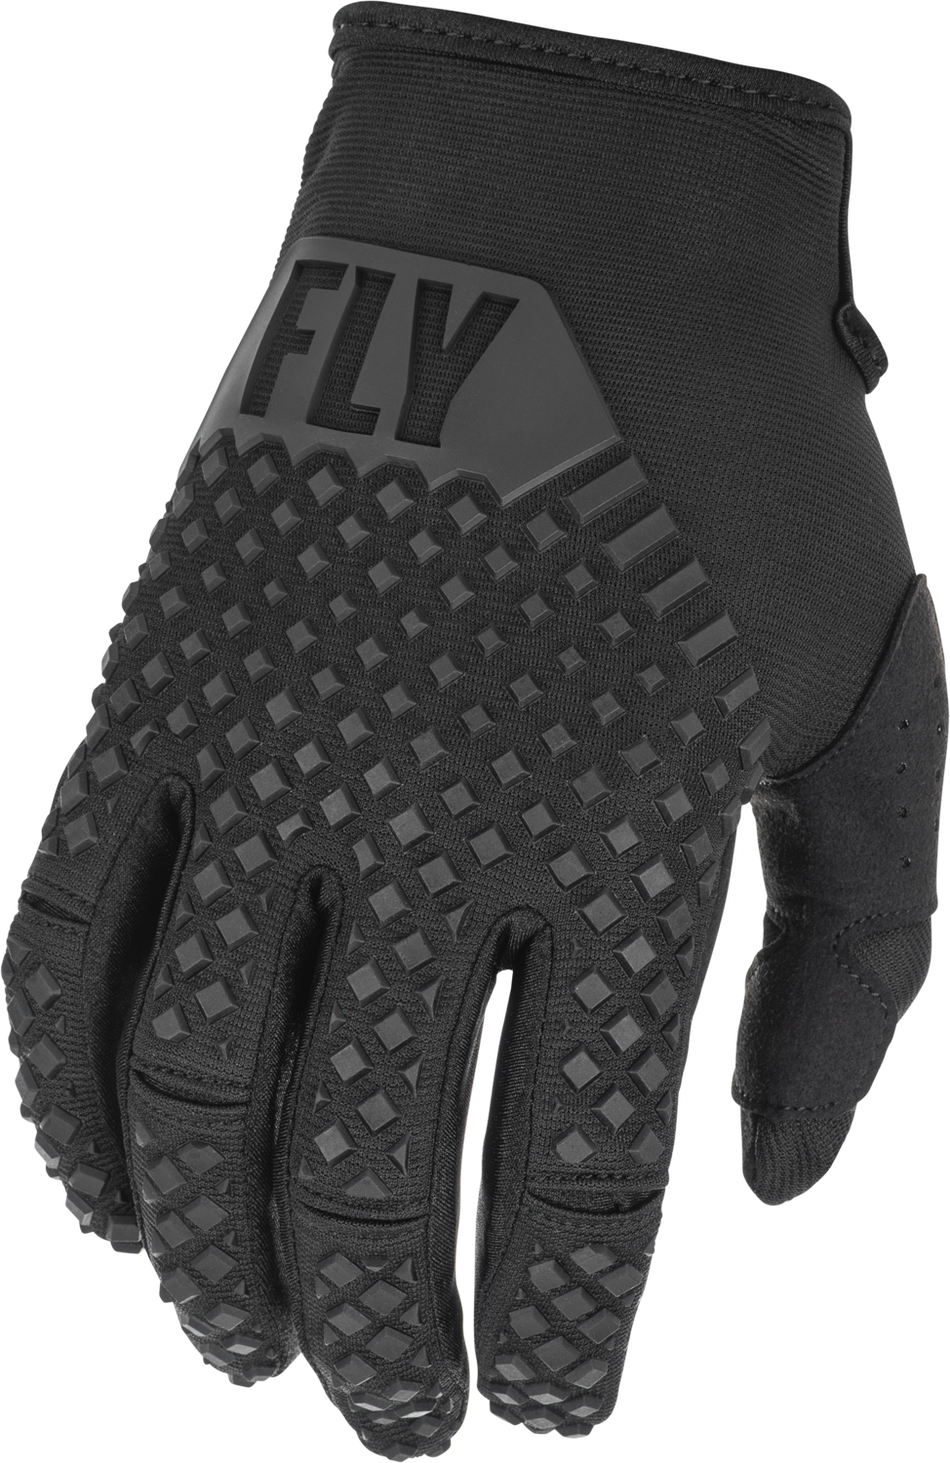 FLY RACING Youth Kinetic Gloves Black Yl 375-410YL